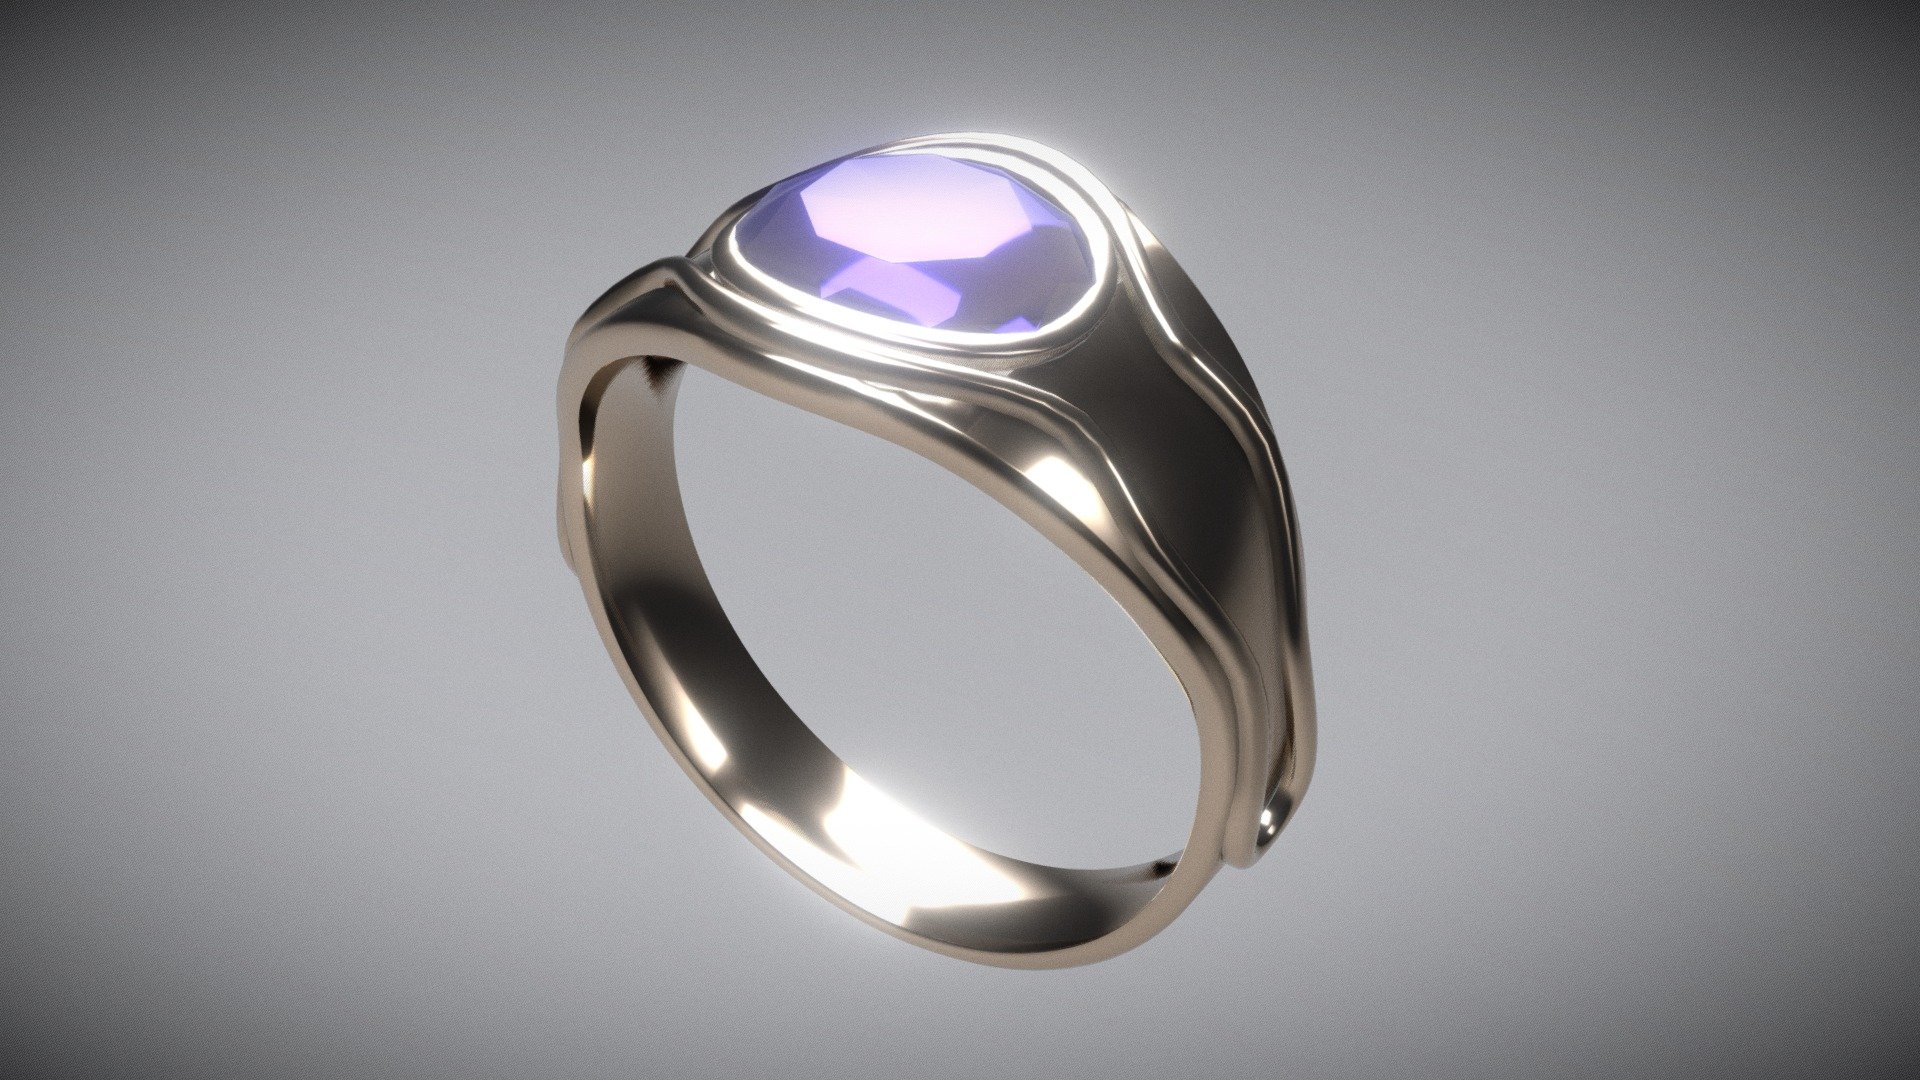 Elrond's ring. From Lord of the Rings.
Fan Art 3d model